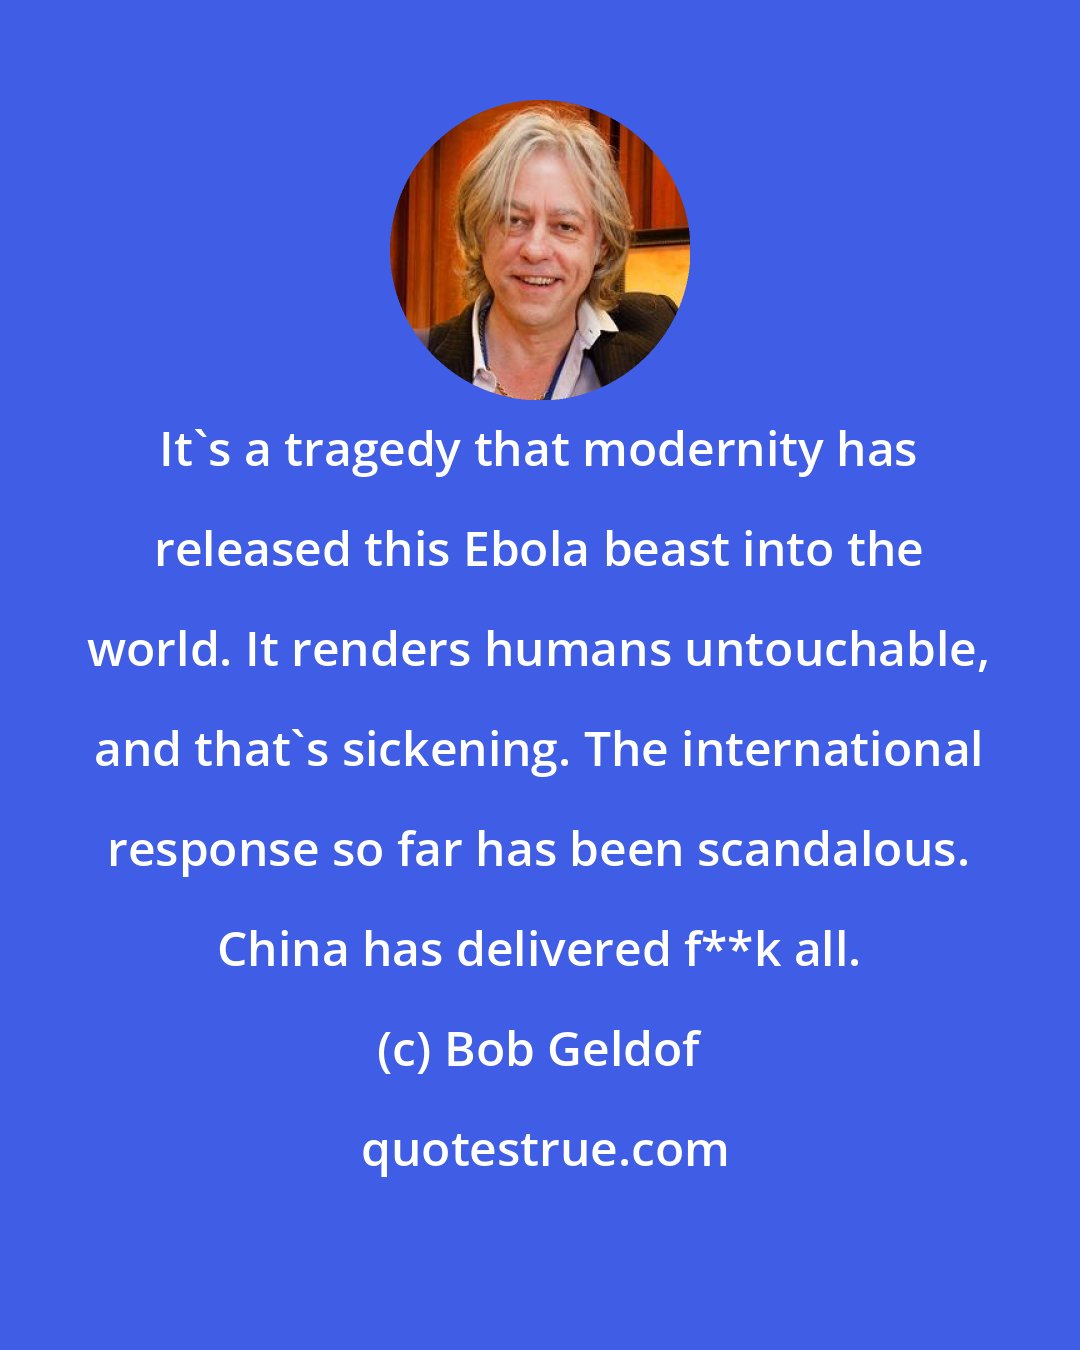 Bob Geldof: It's a tragedy that modernity has released this Ebola beast into the world. It renders humans untouchable, and that's sickening. The international response so far has been scandalous. China has delivered f**k all.